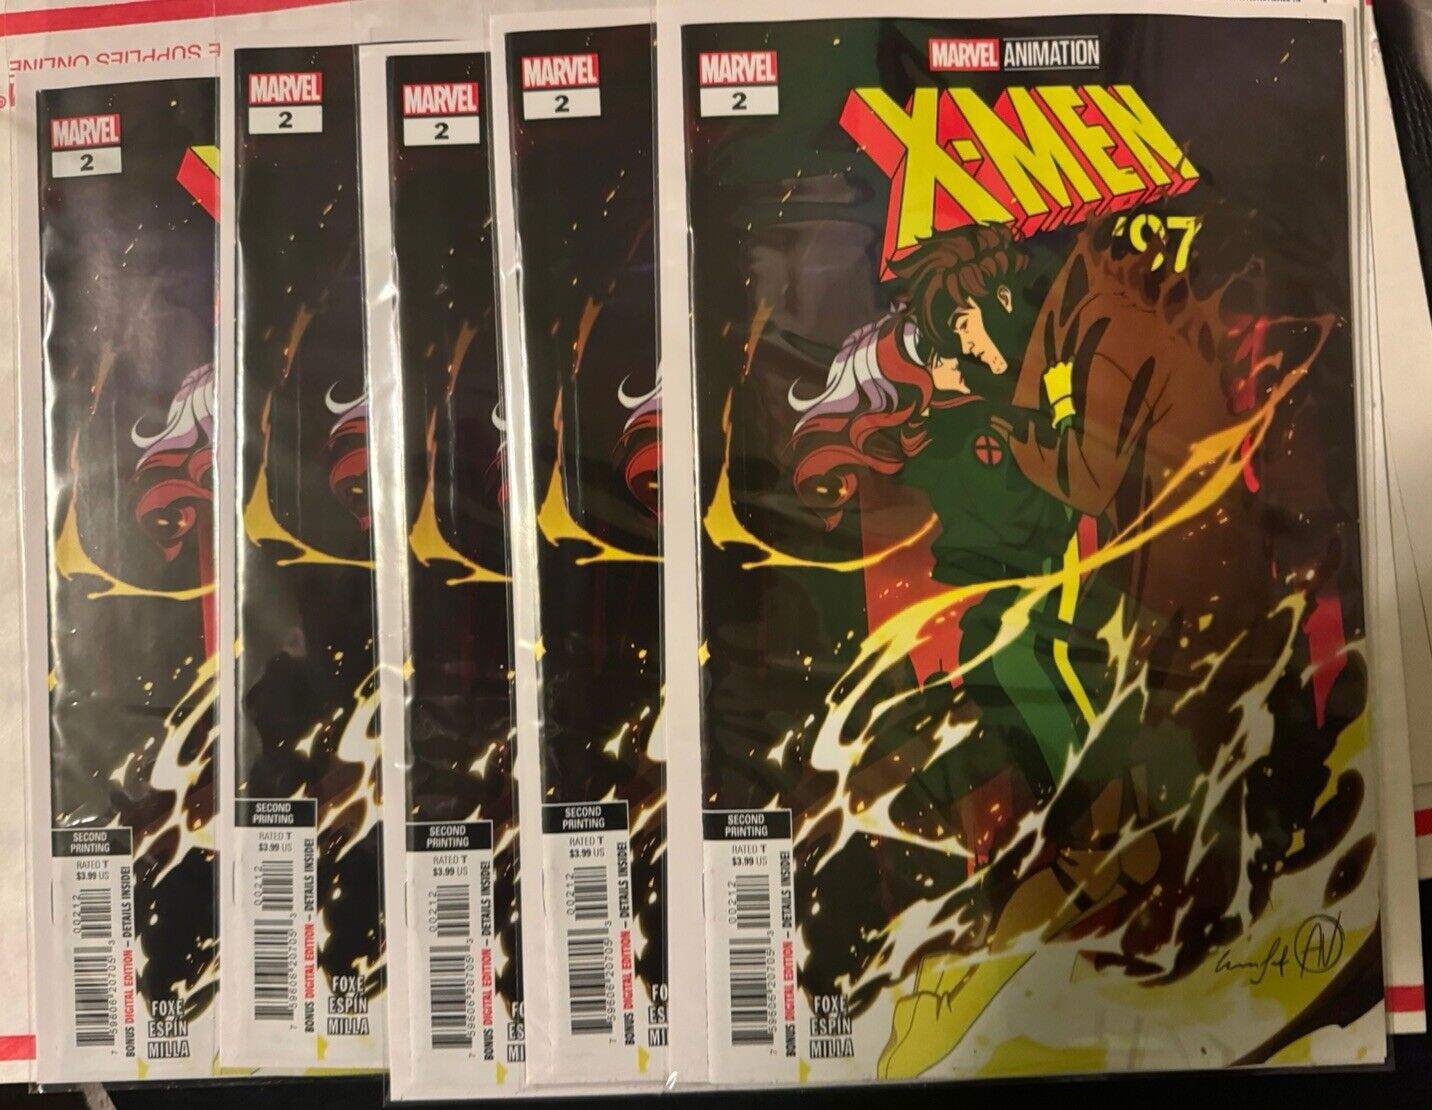 X-MEN '97 #2 MARVEL ANIMATION 2ND Second Printing NM Sold Out